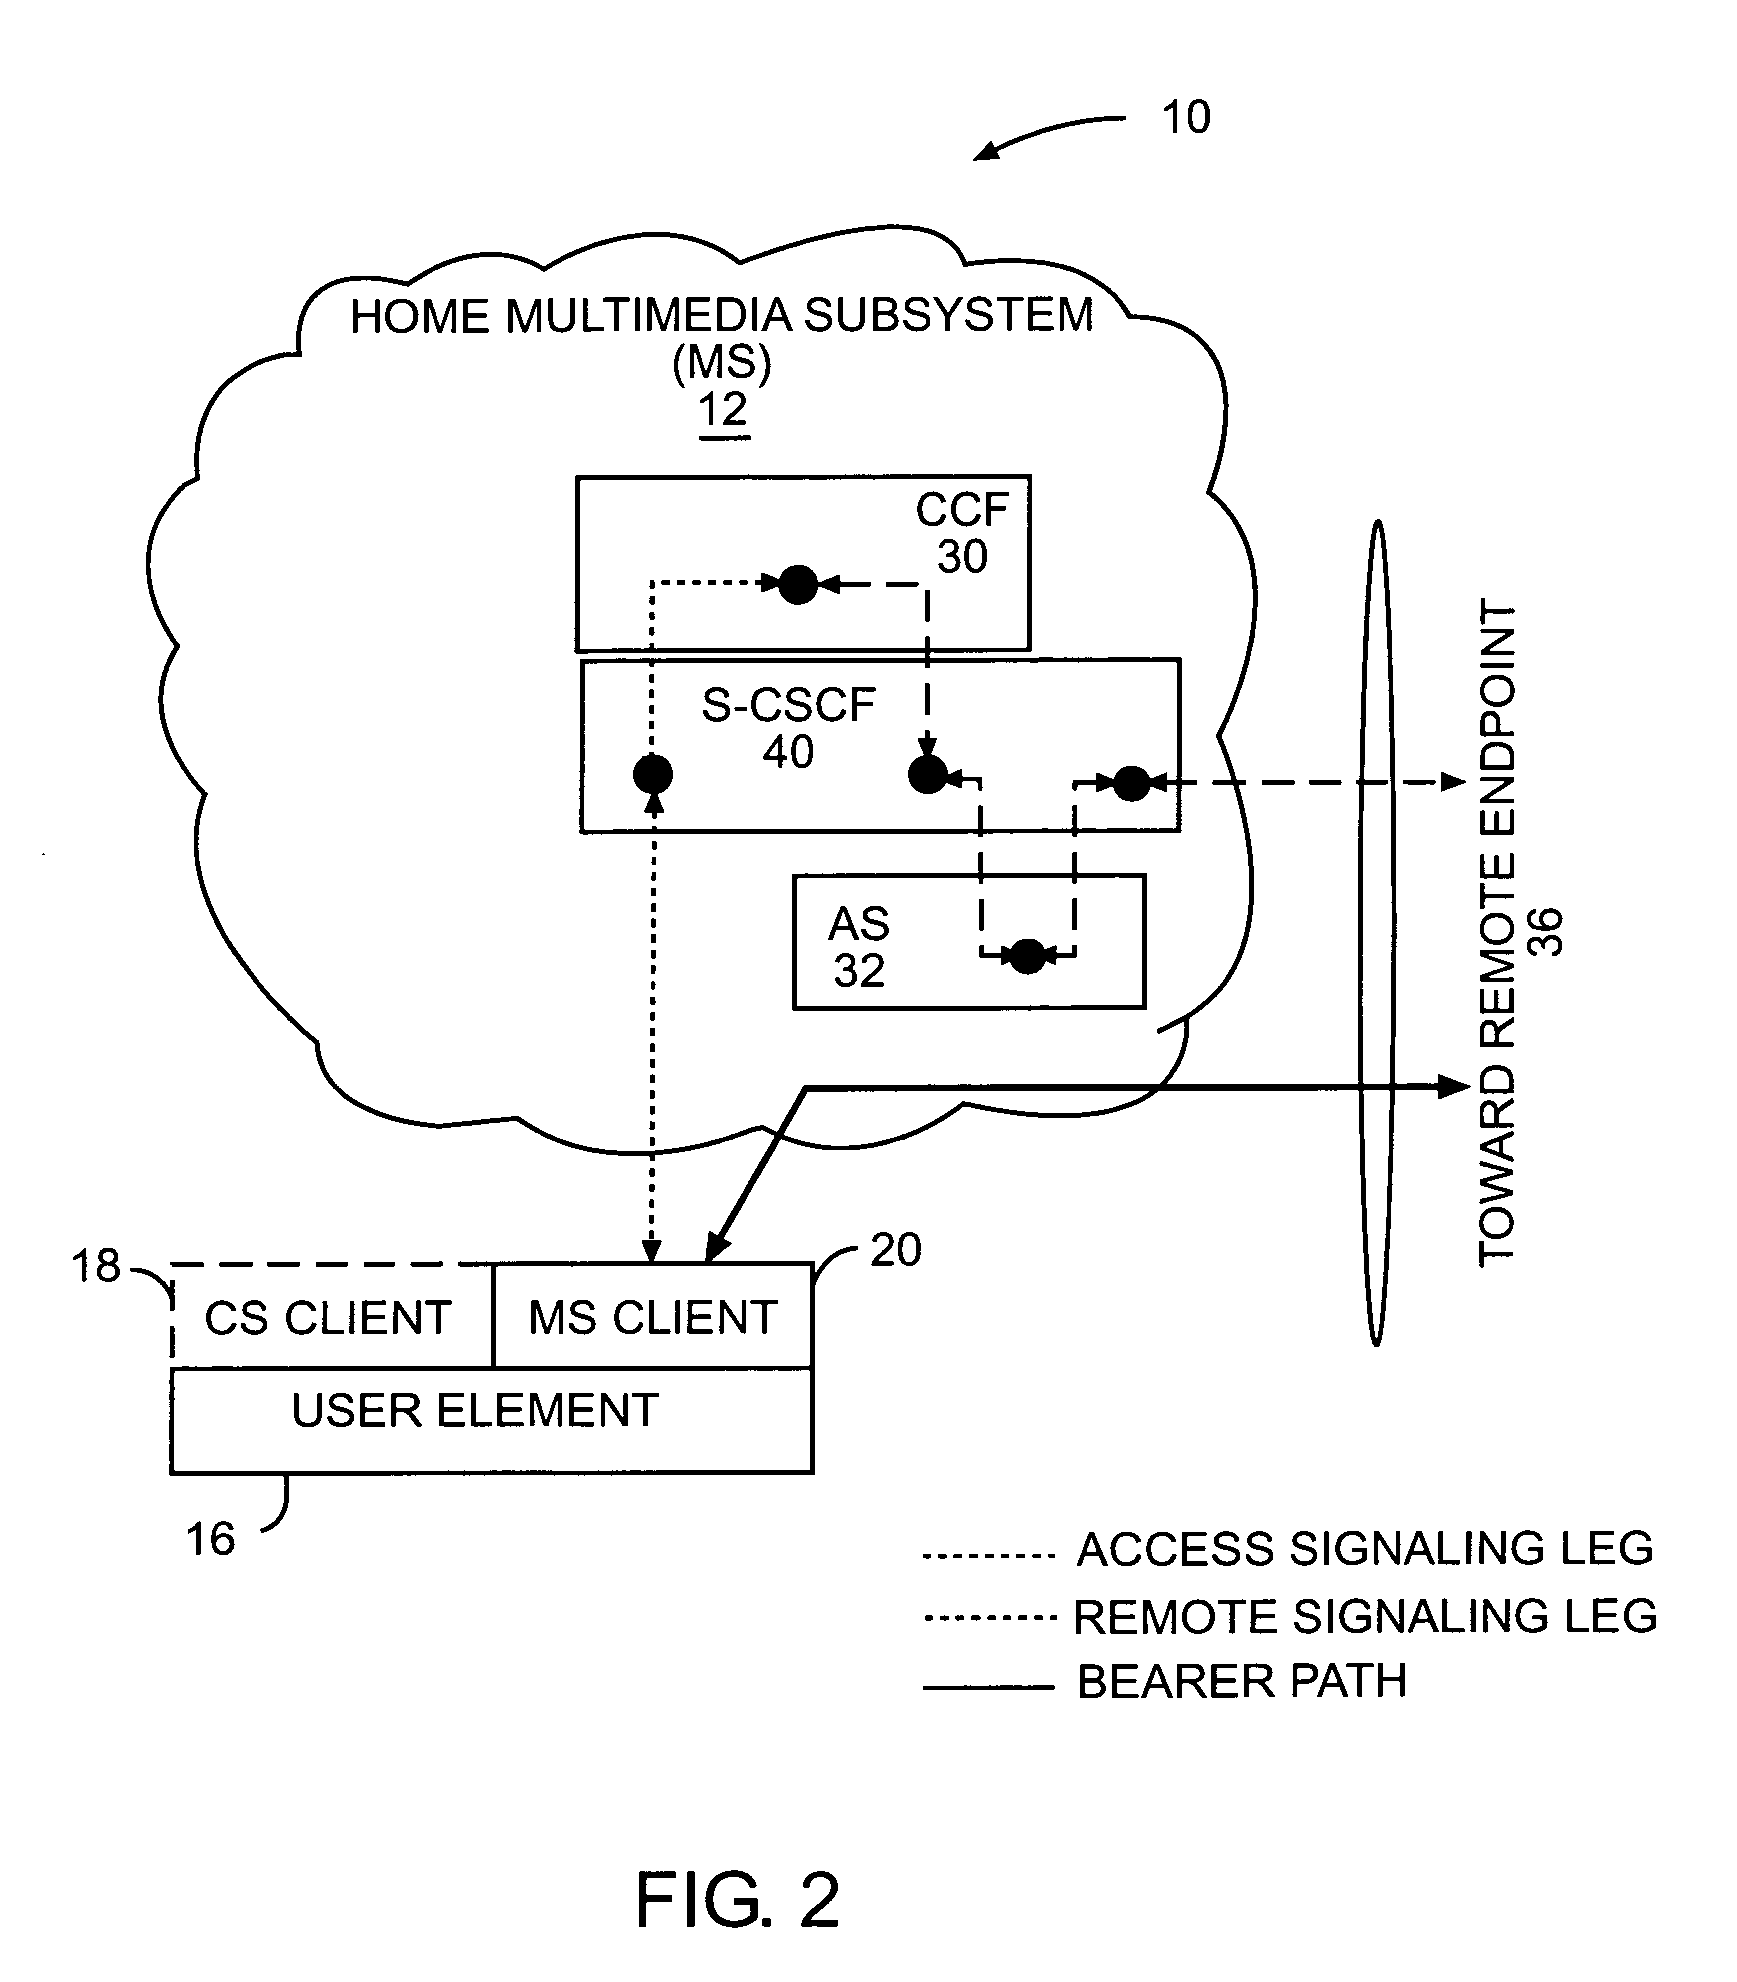 Selective call anchoring in a multimedia subsystem